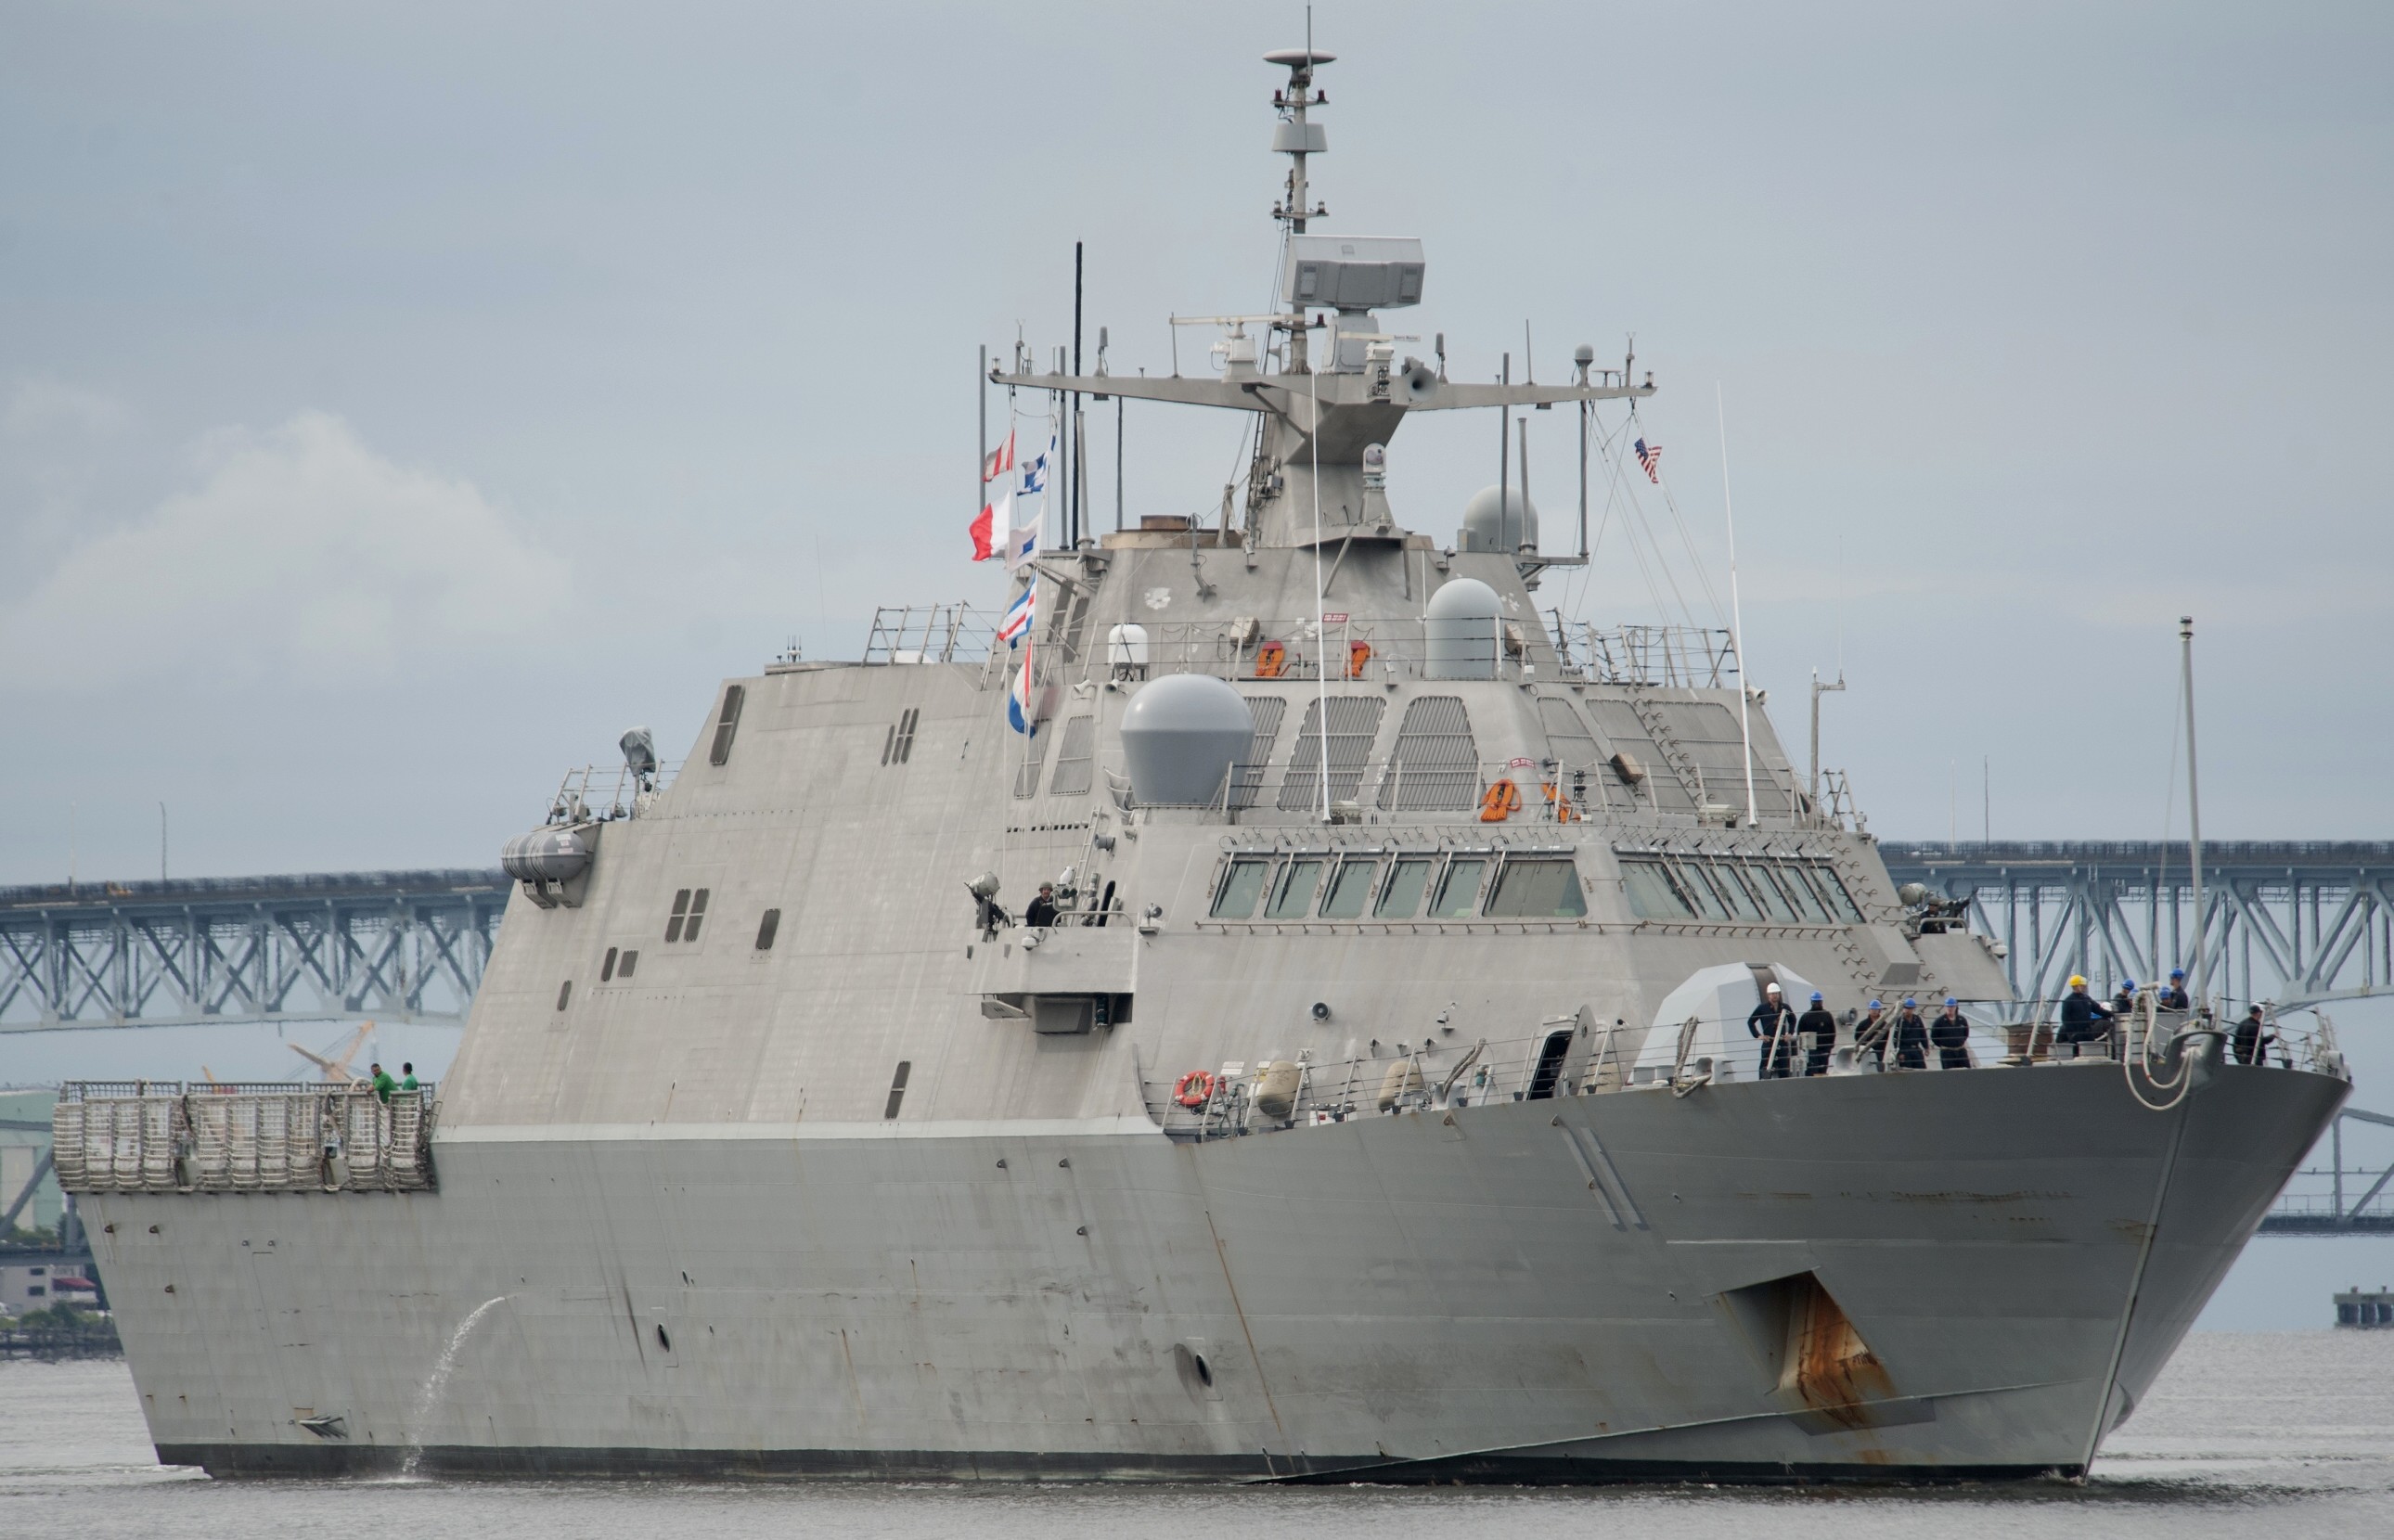 lcs-11 uss sioux city freedom class littoral combat ship us navy 39 subase new london groton connecticut